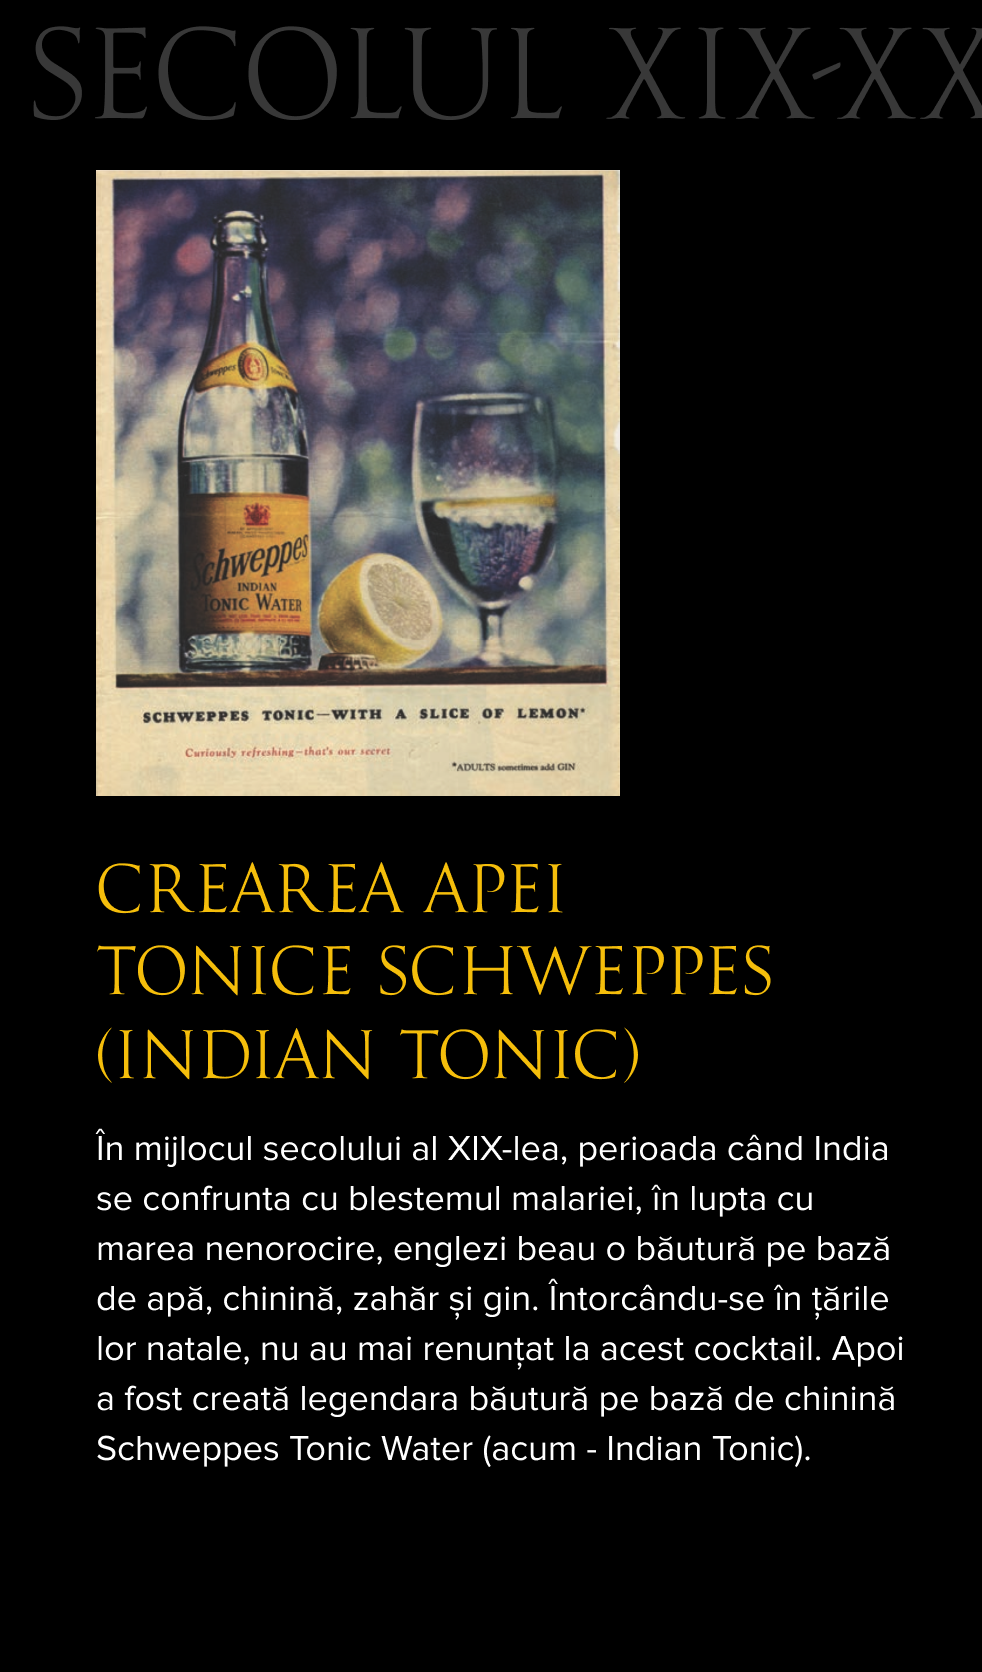 Afis vechi cu Schweppes Tonic Water